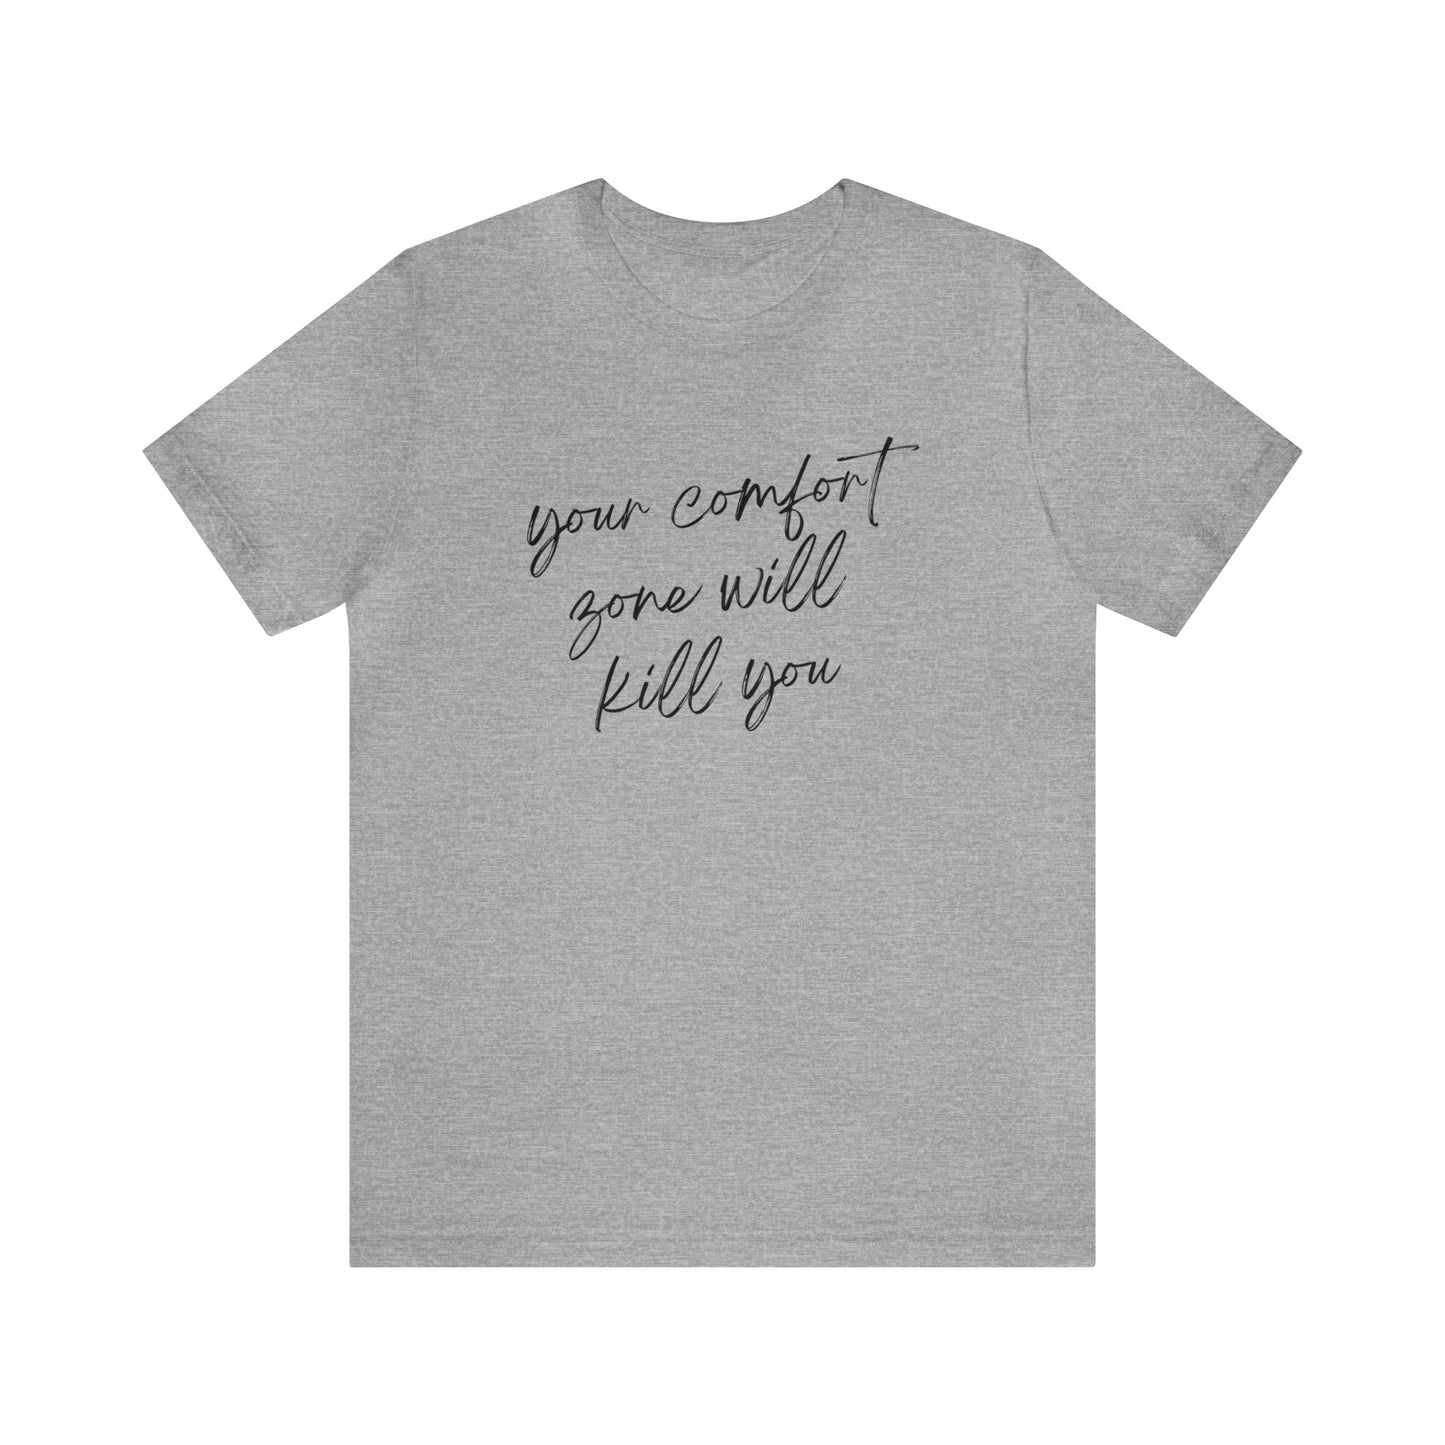 Your comfort zone will kill you Short Sleeves Tee